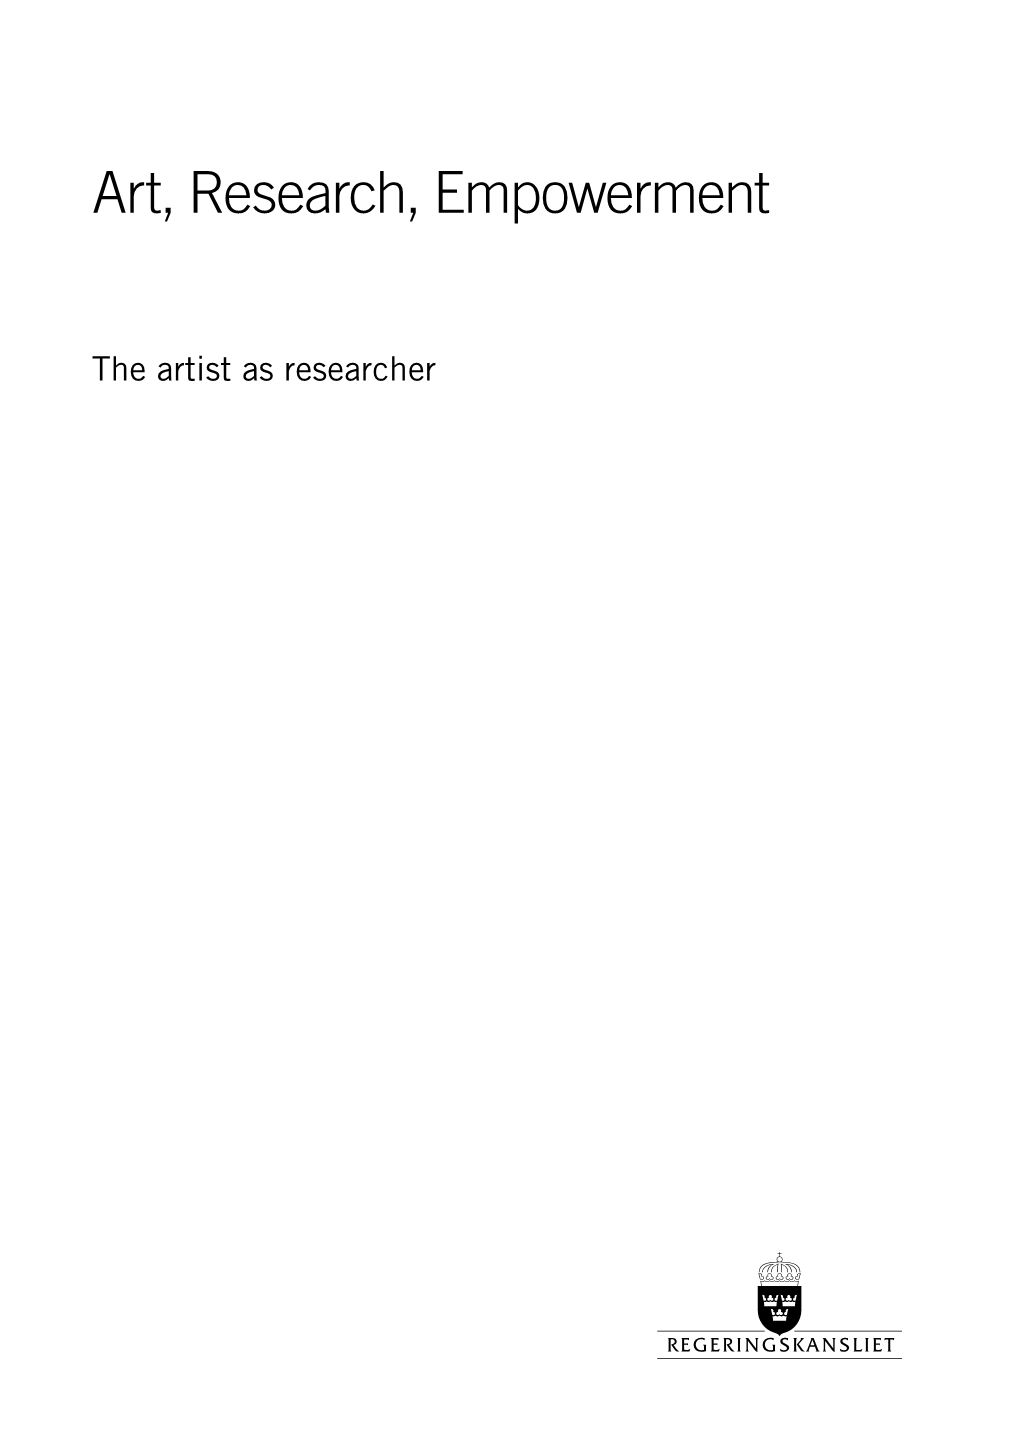 Art, Research, Empowerment Art, Research, Empowerment the Artist As Researcher